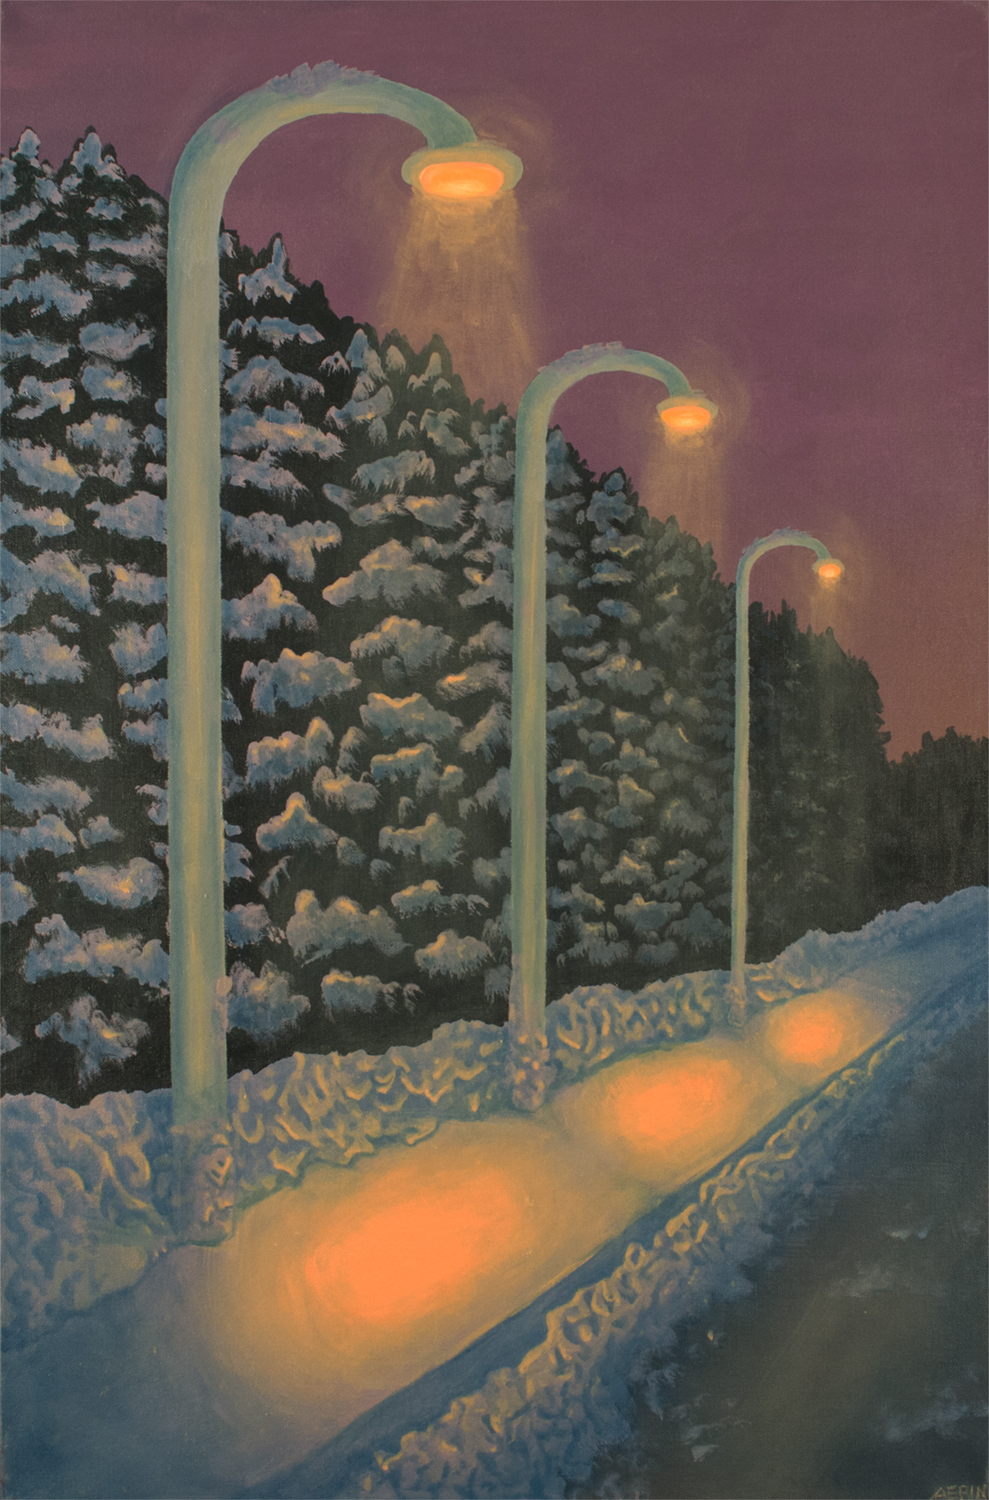 A row of street lamps down a shoveled walkway and backed by tall hedges, courtesy of the artist